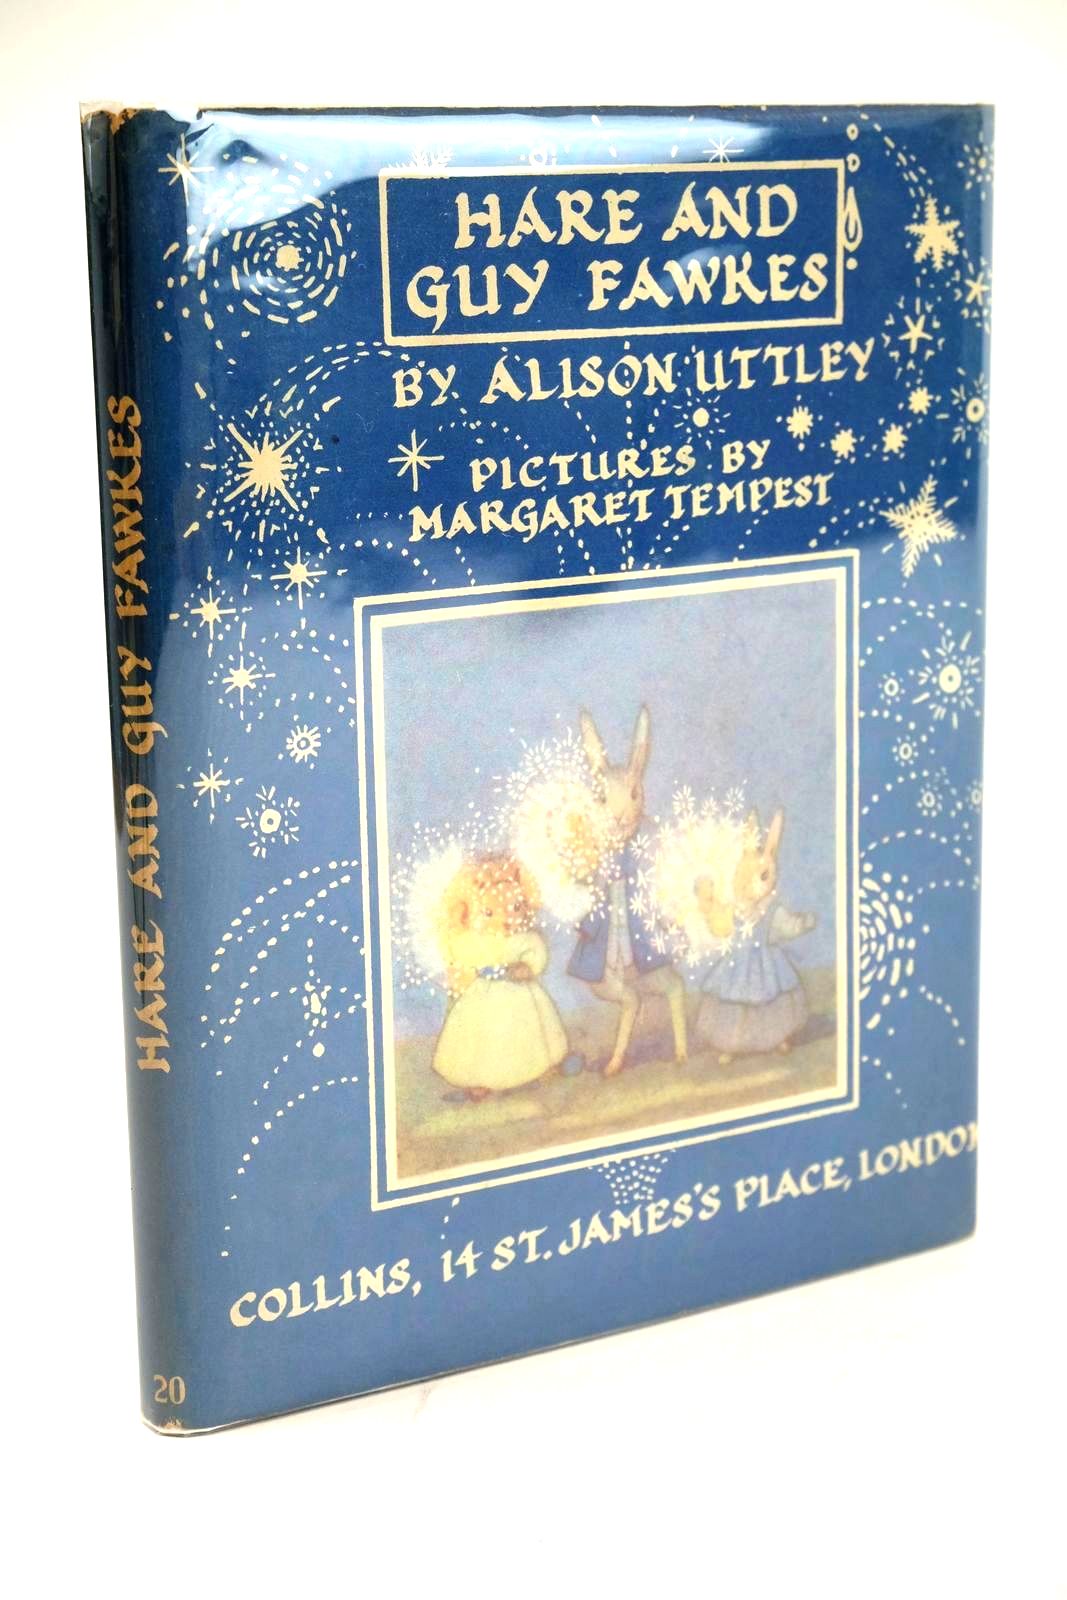 Photo of HARE AND GUY FAWKES written by Uttley, Alison illustrated by Tempest, Margaret published by Collins (STOCK CODE: 1324218)  for sale by Stella & Rose's Books